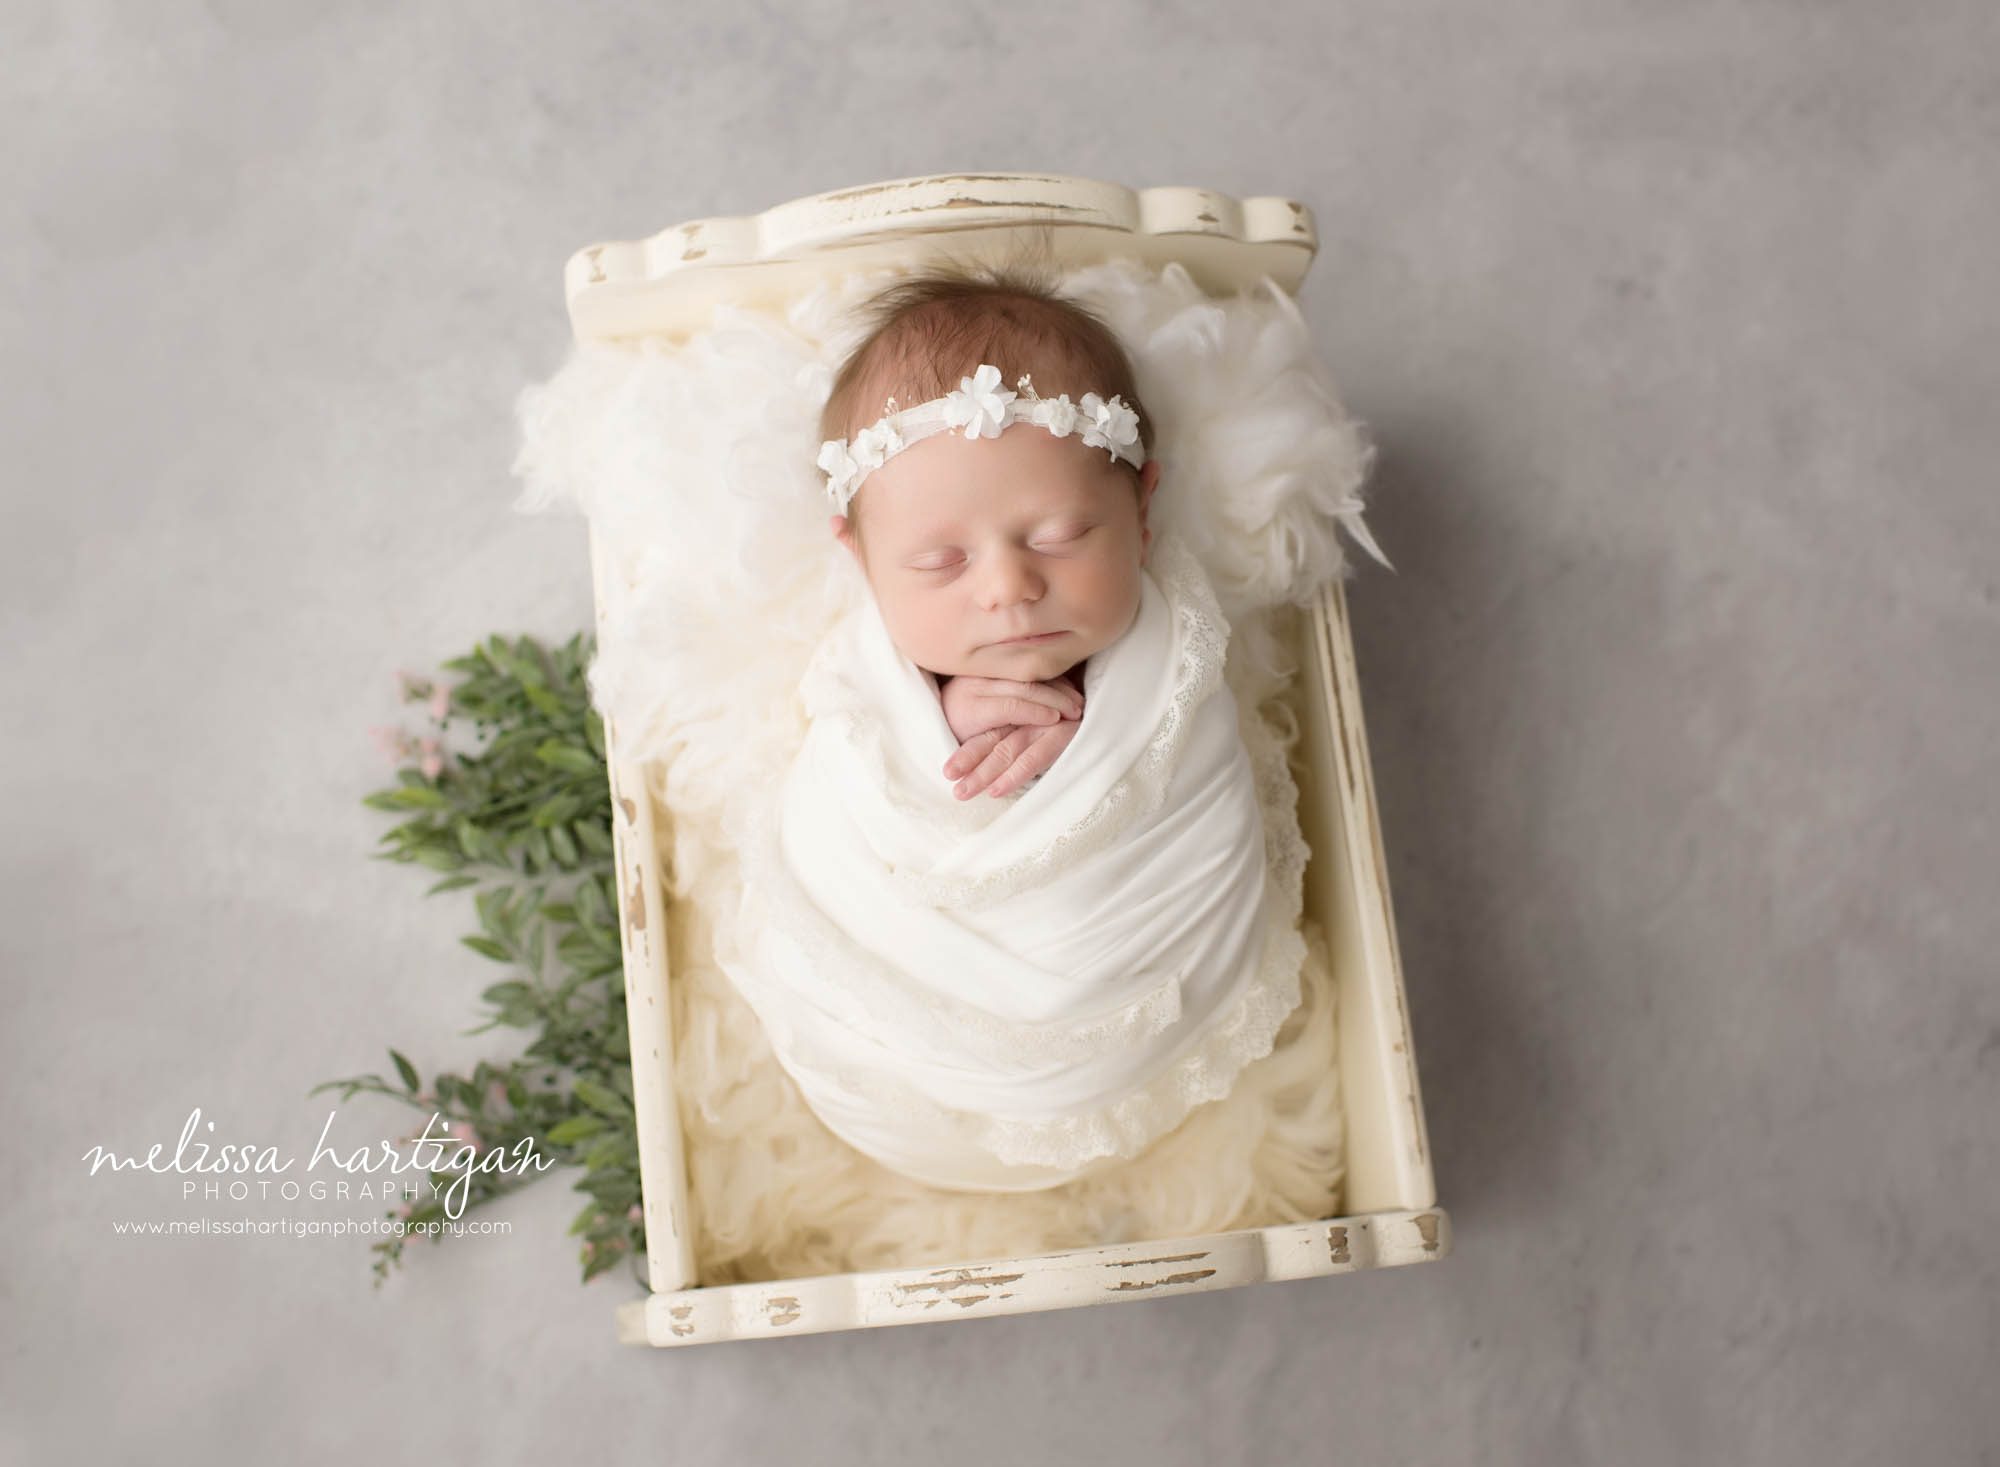 newborn baby girl wrapped in cream wrap posed in wooden cradle